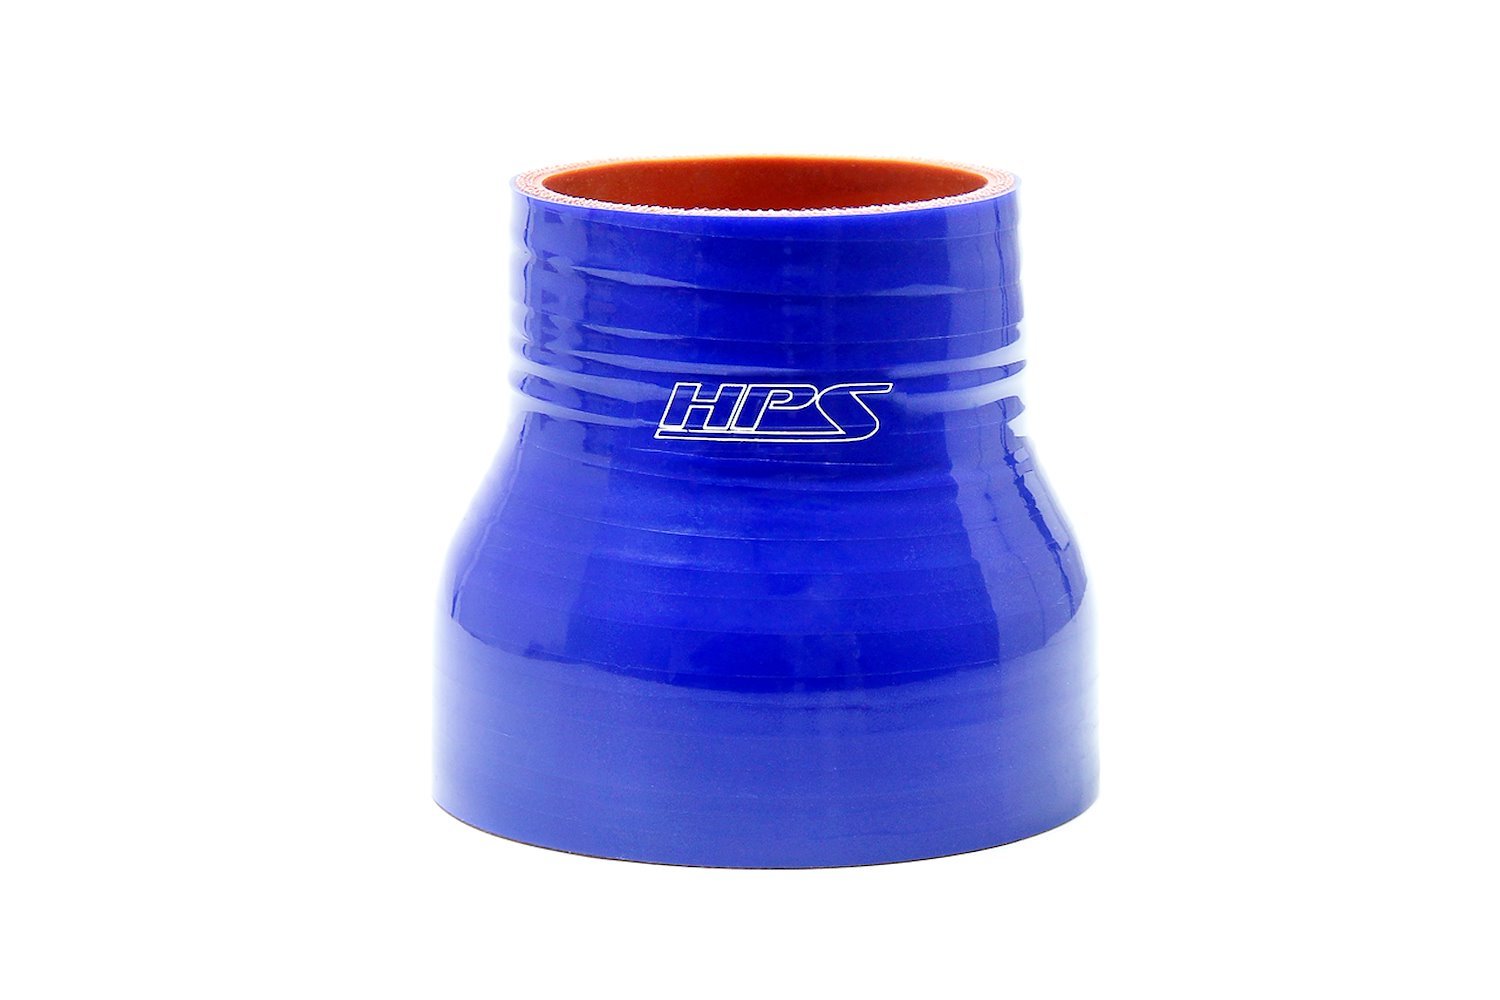 HTSR-225-250-L4-BLUE Silicone Reducer Hose, High-Temp 4-Ply Reinforced, 2-1/4 in. - 2-1/2 in. ID, 4 in. Long, Blue